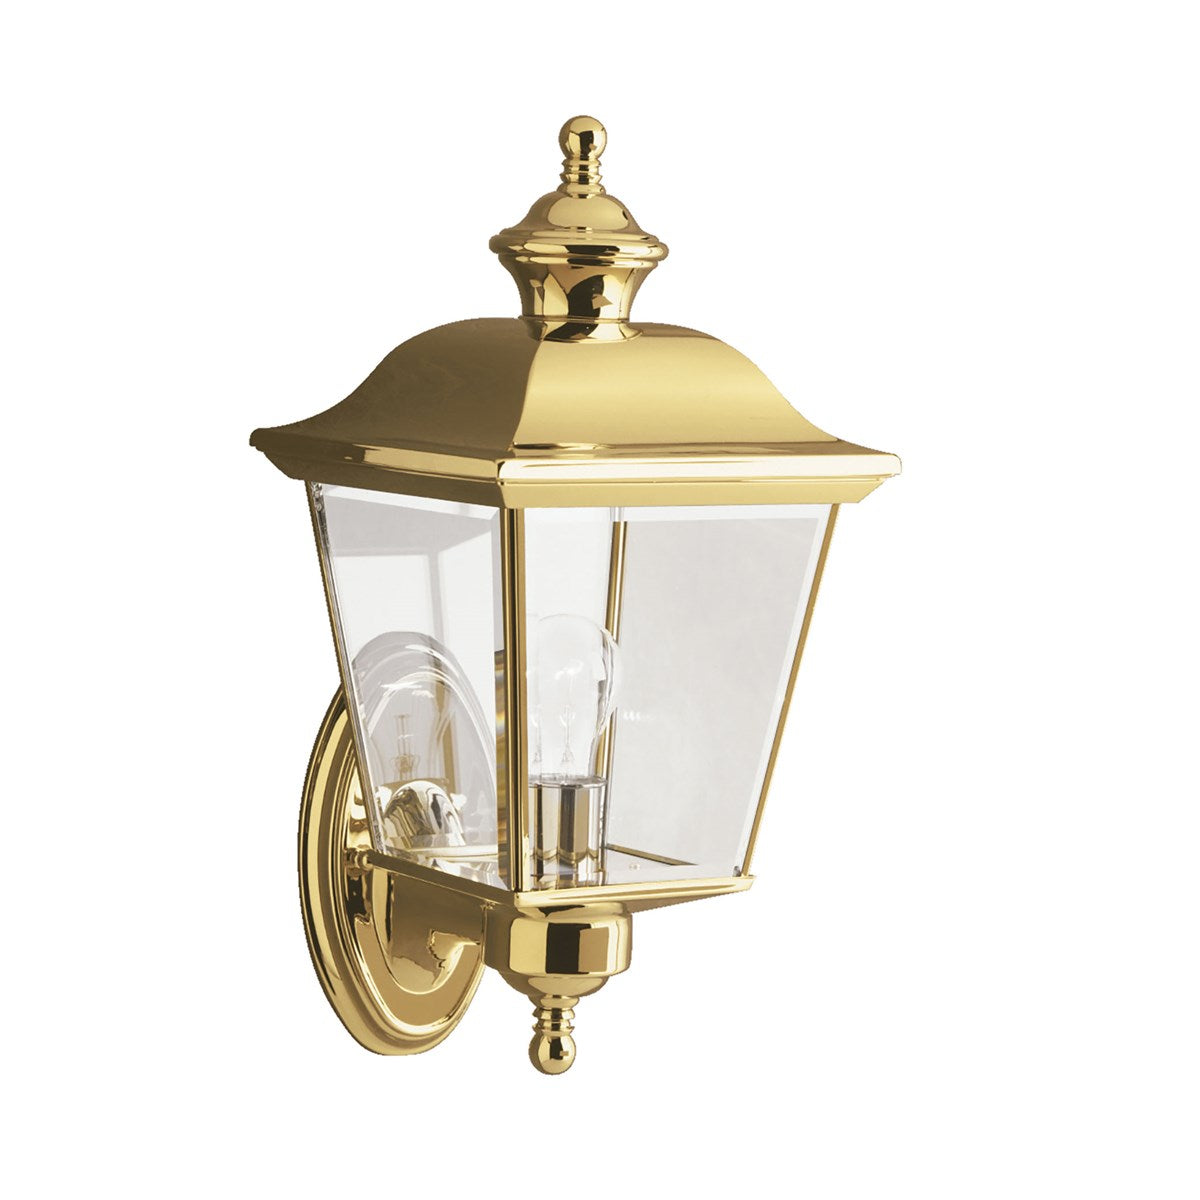 Bay Shore 16 in. Outdoor Wall Sconces Polished Brass Finish